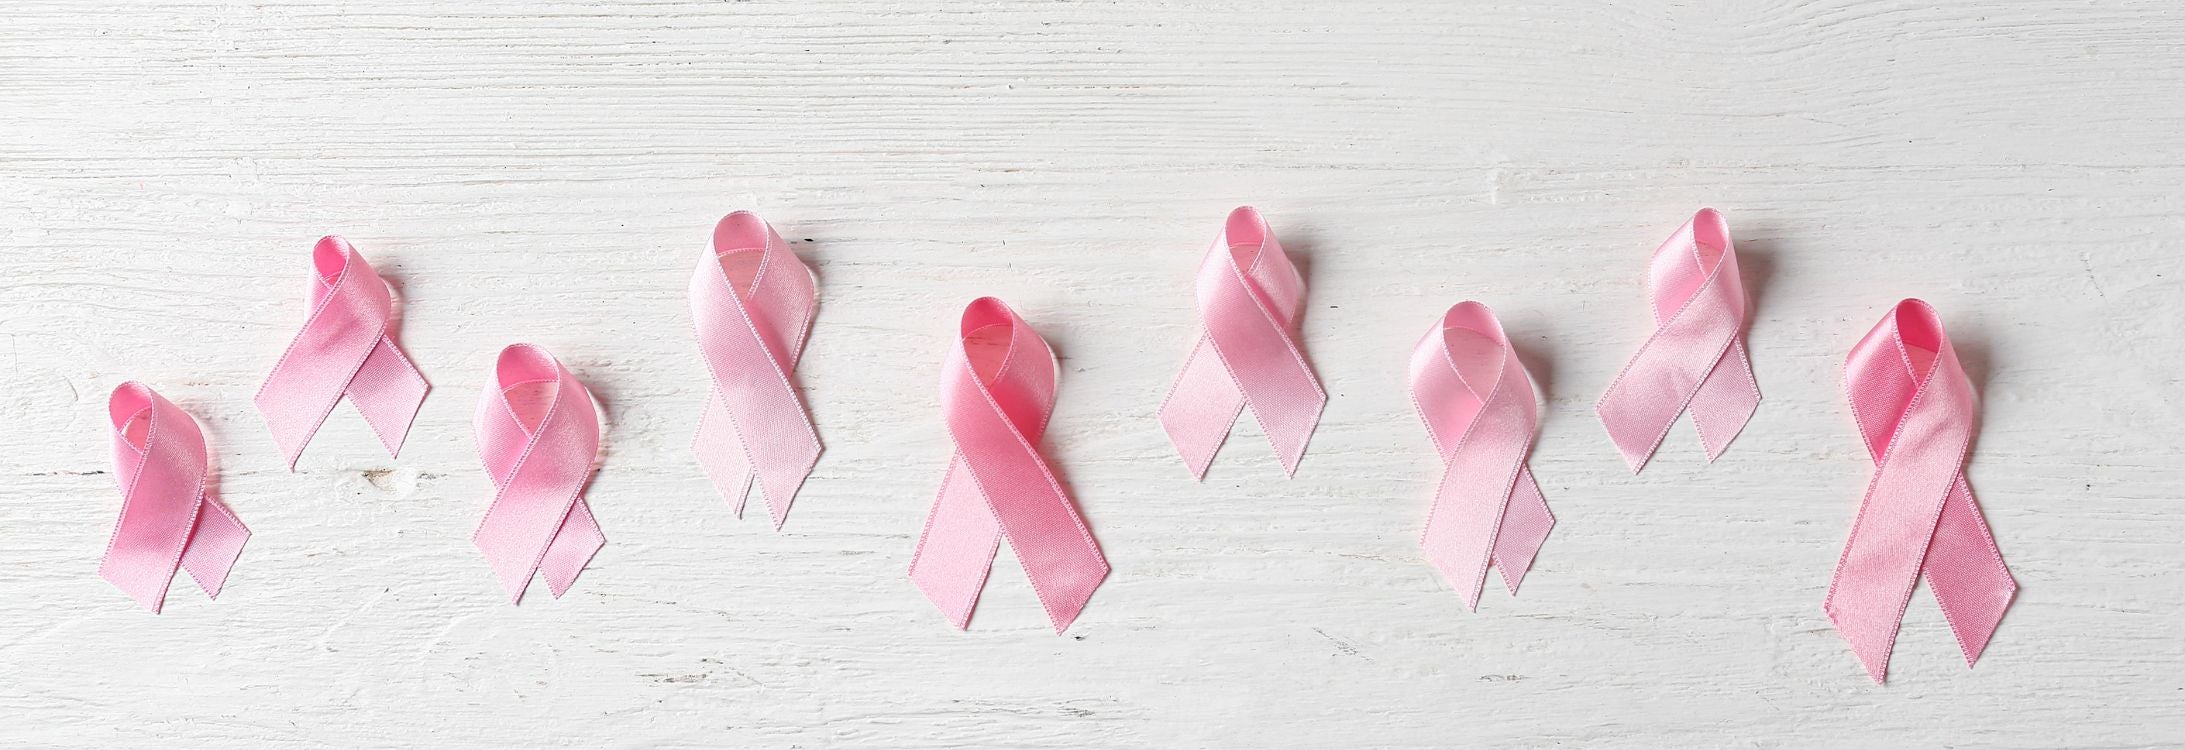 Breast Cancer Awareness blog cover - pink ribbons